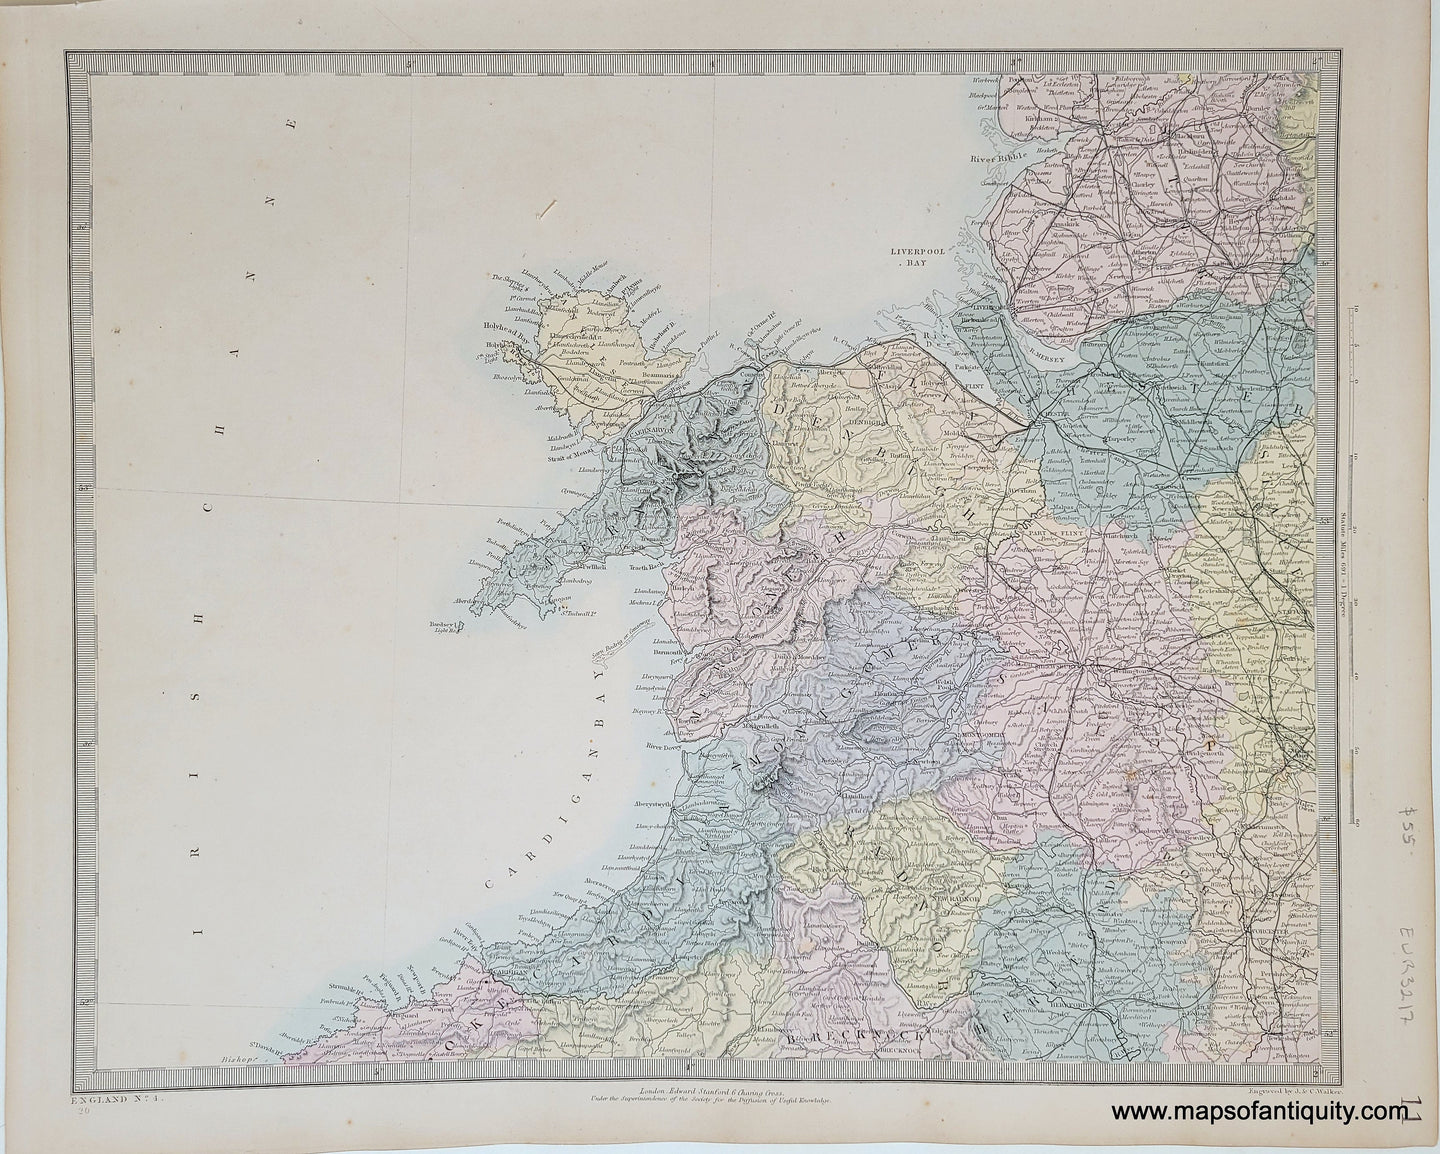 Genuine-Antique-Map-England-and-Wales-in-six-sheets-sheet-4-England-and-Wales--1860-SDUK-Society-for-the-Diffusion-of-Useful-Knowledge-Maps-Of-Antiquity-1800s-19th-century